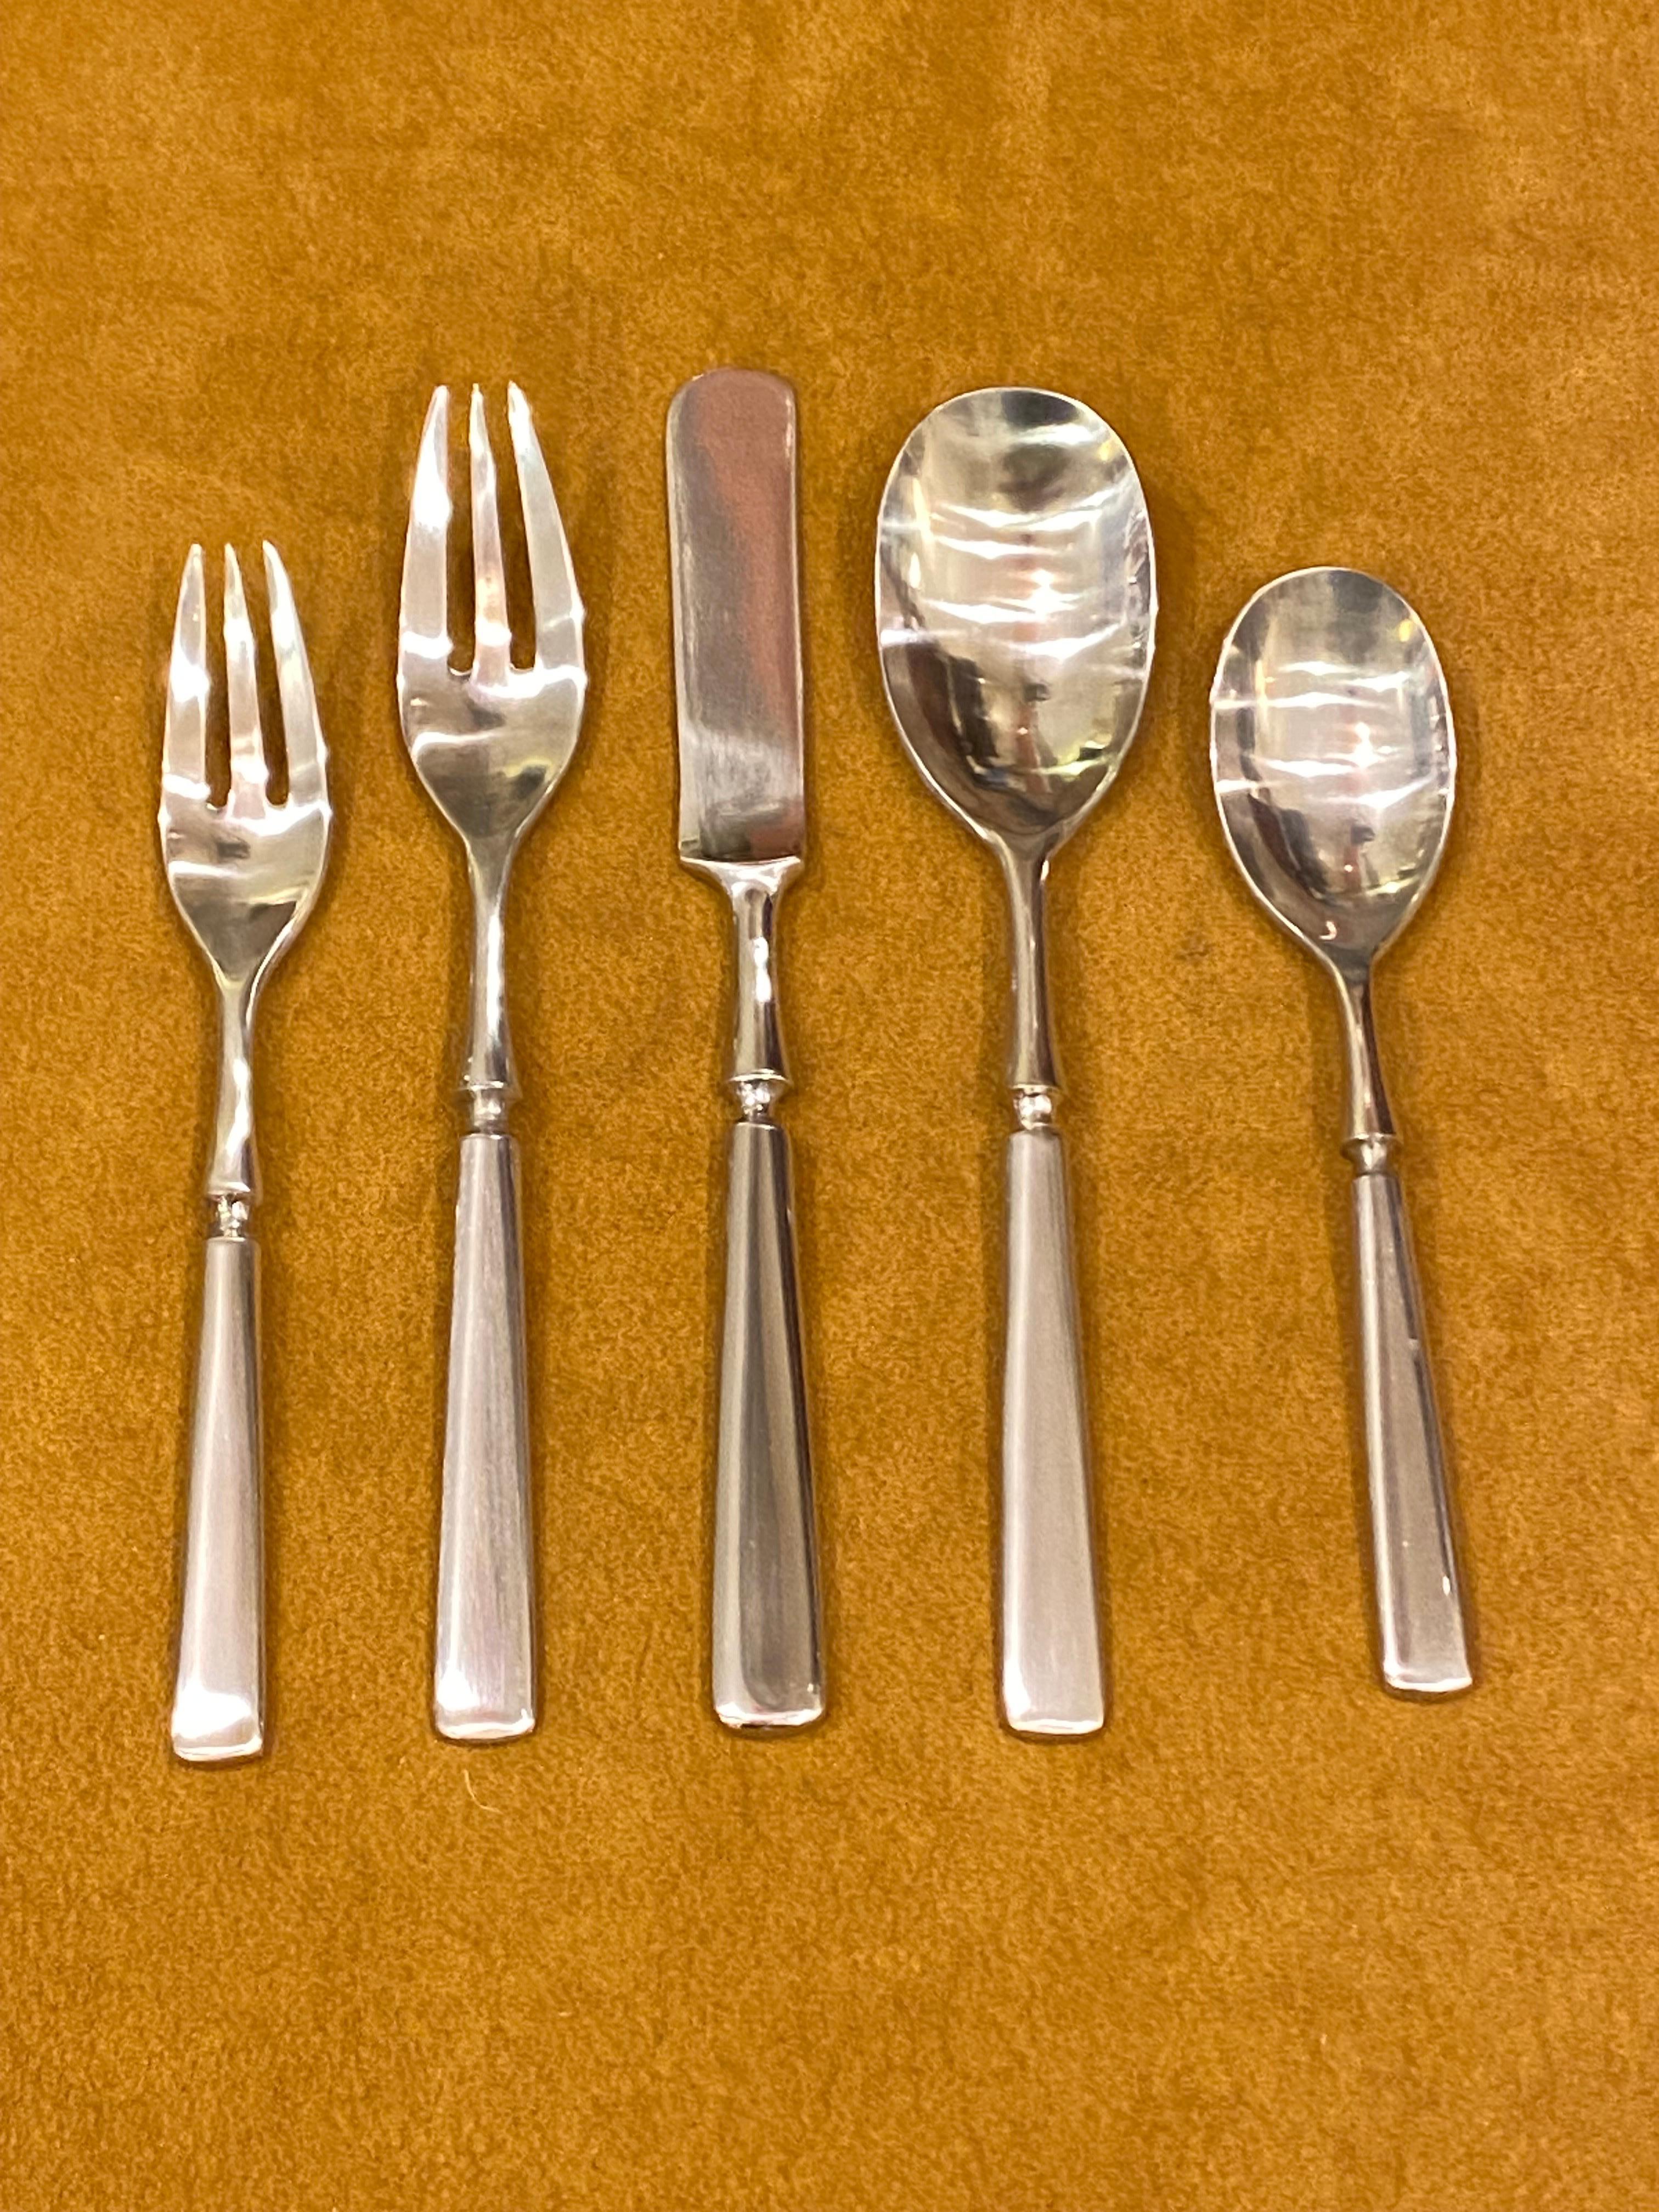 Dansk Service for 8 Stainless Steel Flatware Set.  Anvil Pattern 40 pieces all new and unused!  All in their original plastic sleeves!  Clean as a whistle!  Set is marked japan which dates the manufacture date to the 70's or 80's.